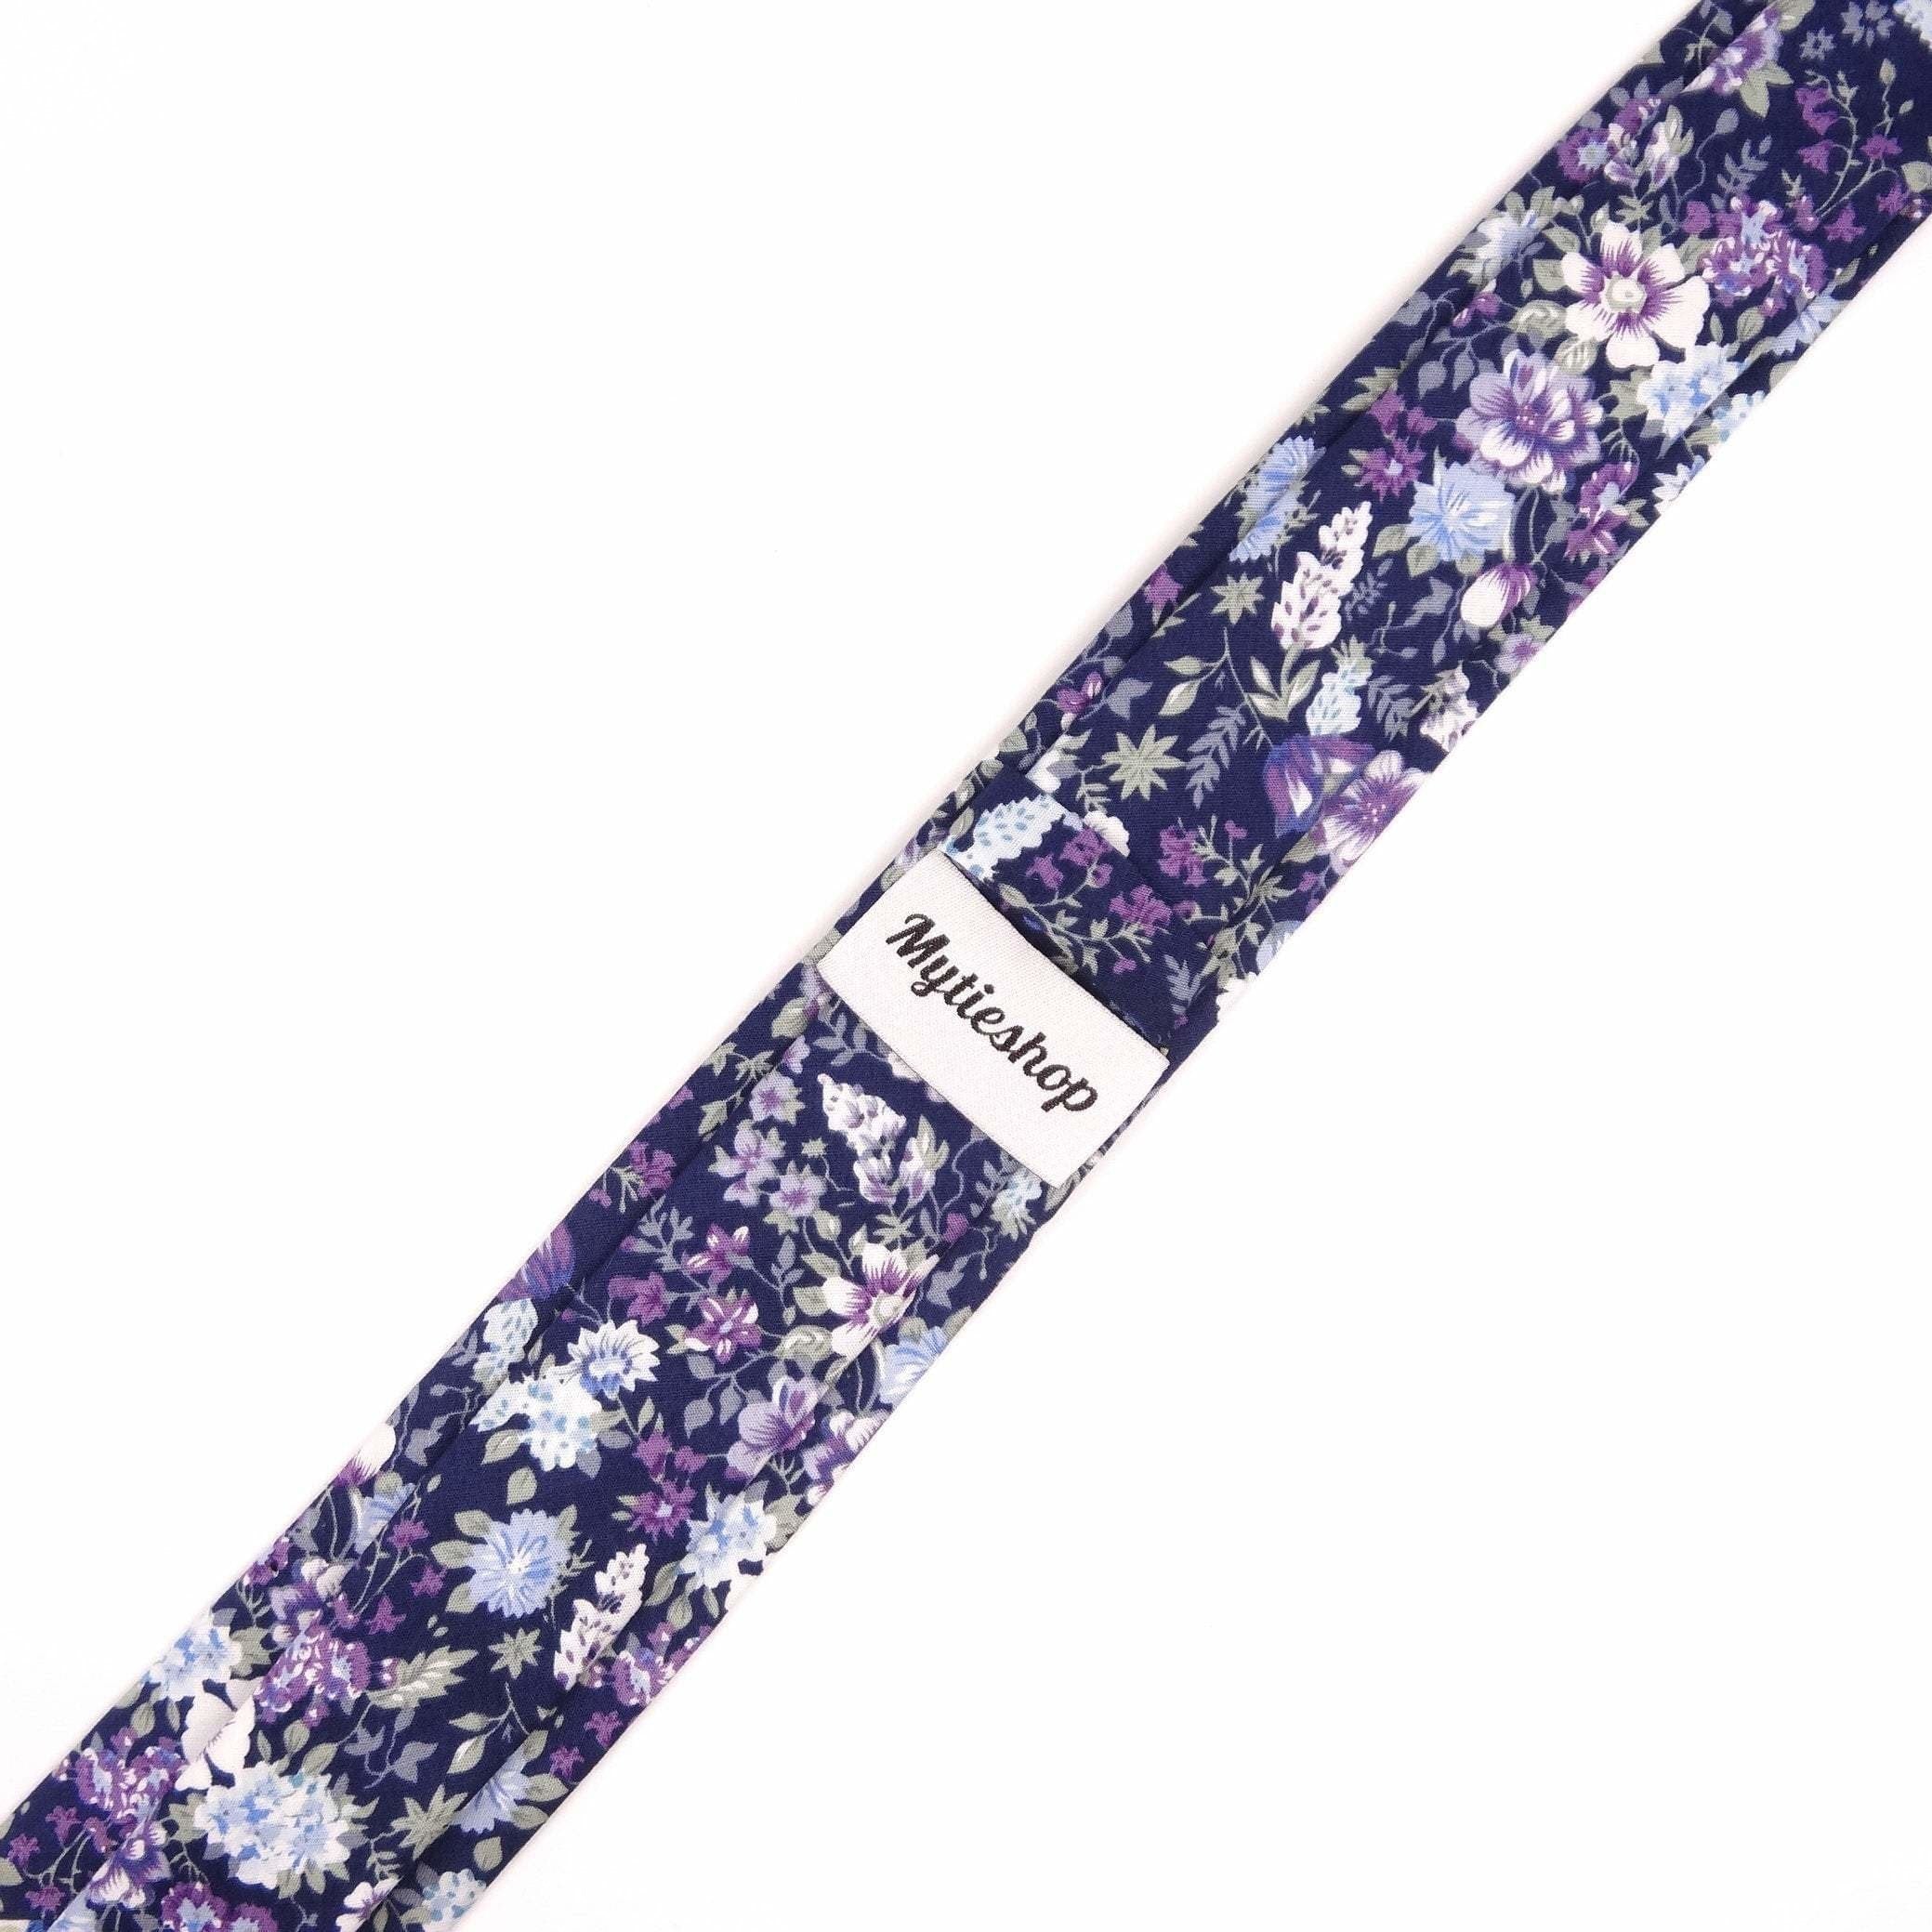 Purple floral tie men 2.36&quot; SWEET PEA - MYTIESHOP -Neckties-Purple floral tie men Men’s Floral Necktie for weddings and events, great for prom and anniversary gifts. Mens floral ties near me us ties tie shops cool tie-Mytieshop. Skinny ties for weddings anniversaries. Father of bride. Groomsmen. Cool skinny neckties for men. Neckwear for prom, missions and fancy events. Gift ideas for men. Anniversaries ideas. Wedding aesthetics. Flower ties. Dry flower ties.